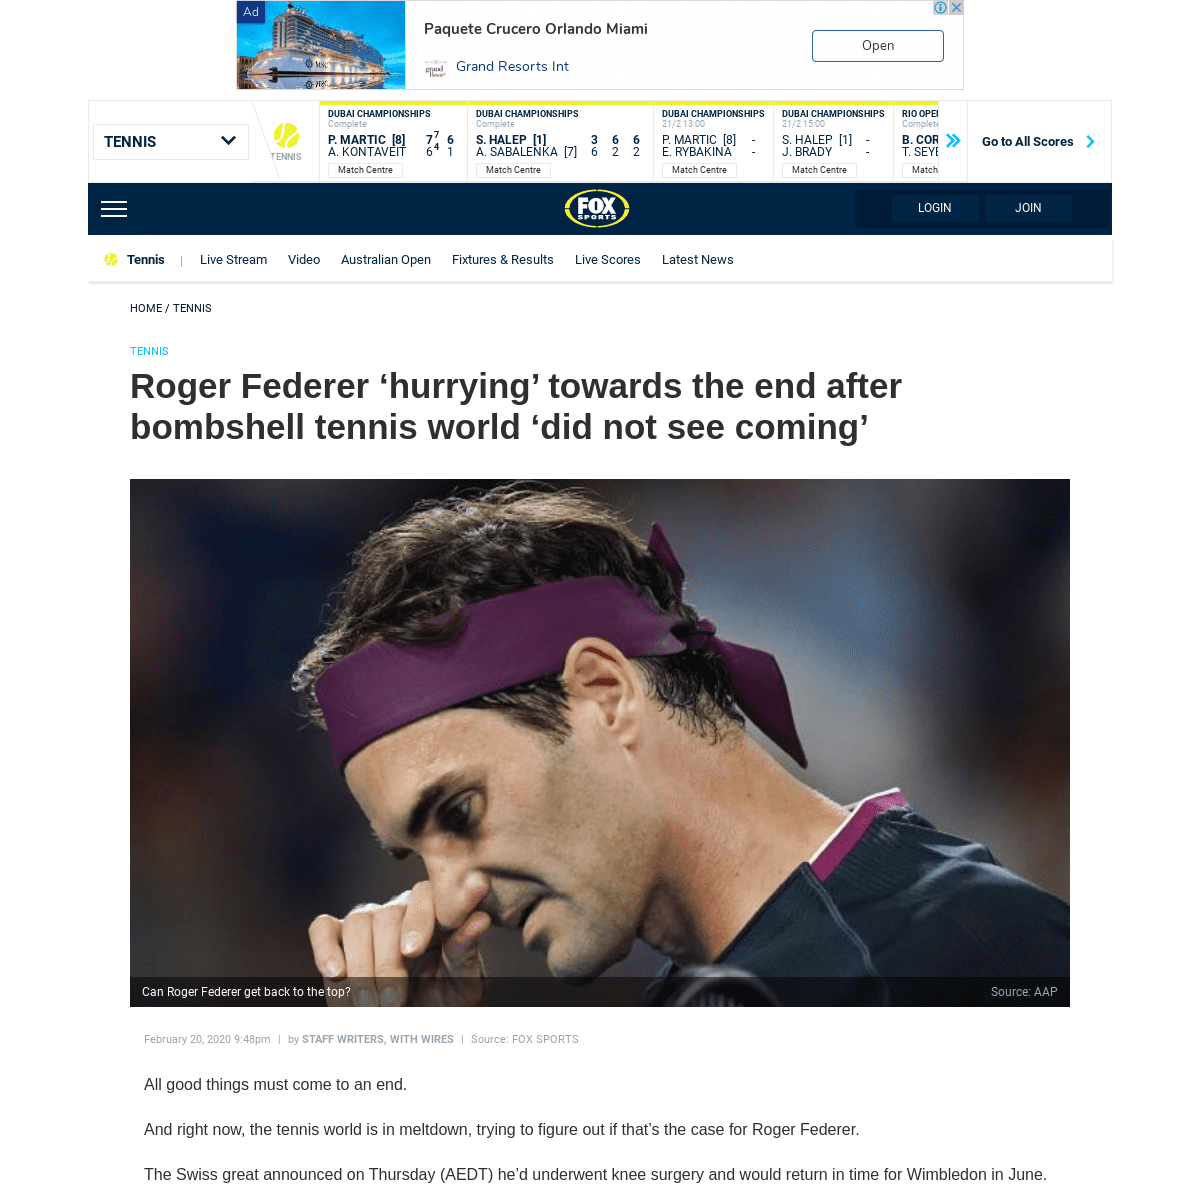 A complete backup of www.foxsports.com.au/tennis/roger-federer-hurrying-towards-the-end-after-bombshell-tennis-world-did-not-see